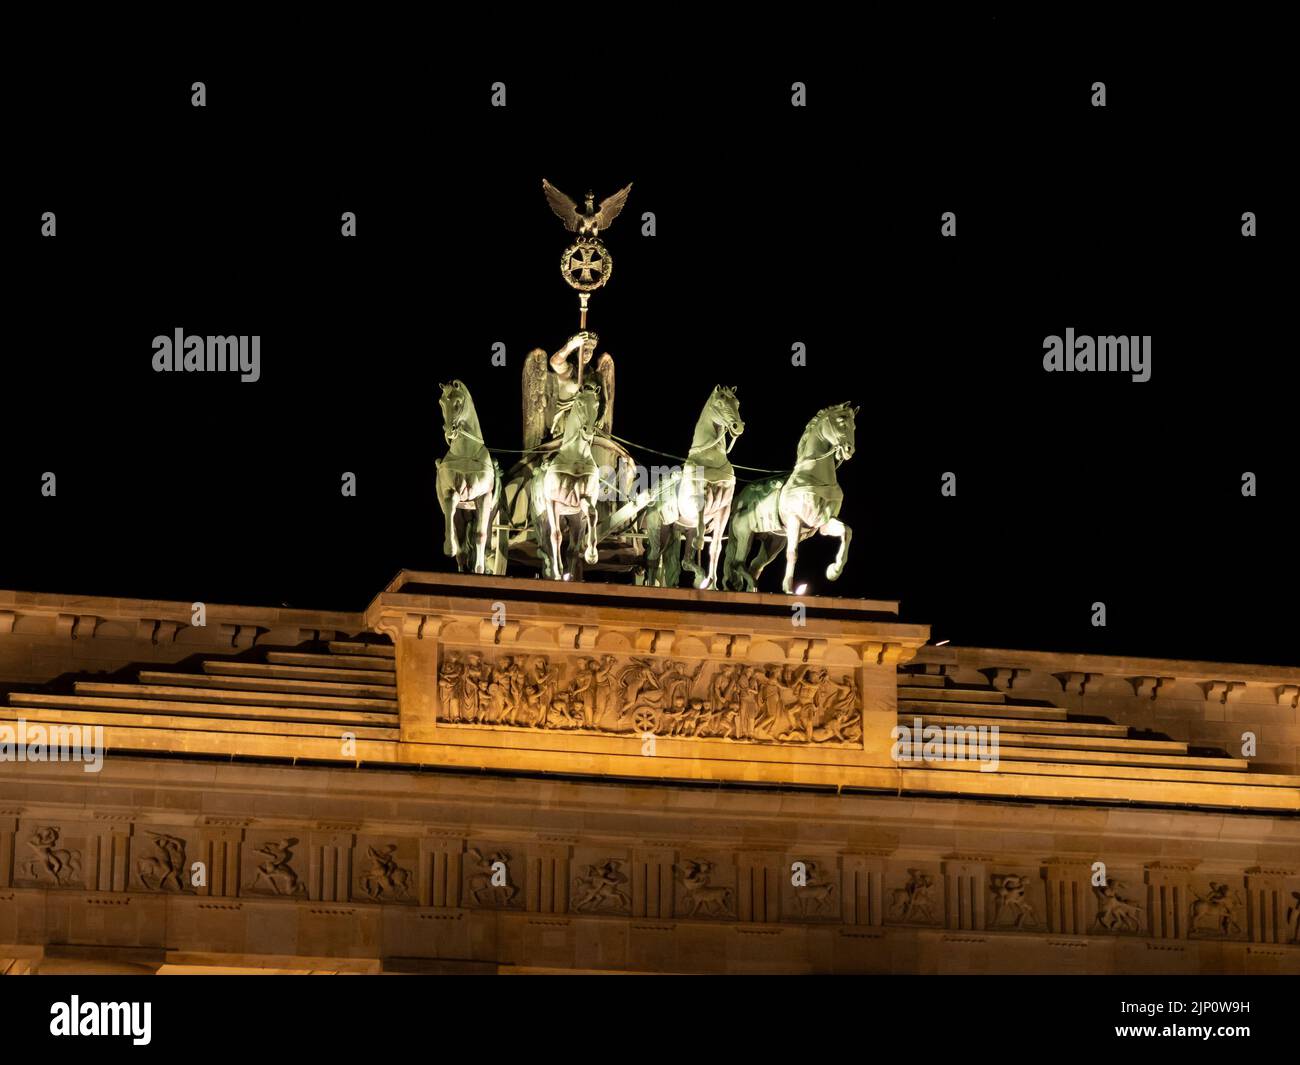 Quadriga on the Brandenburg Gate at night. The sculpture was designed by Johann Gottfried Schadow. The German culture in the capital city Berlin. Stock Photo